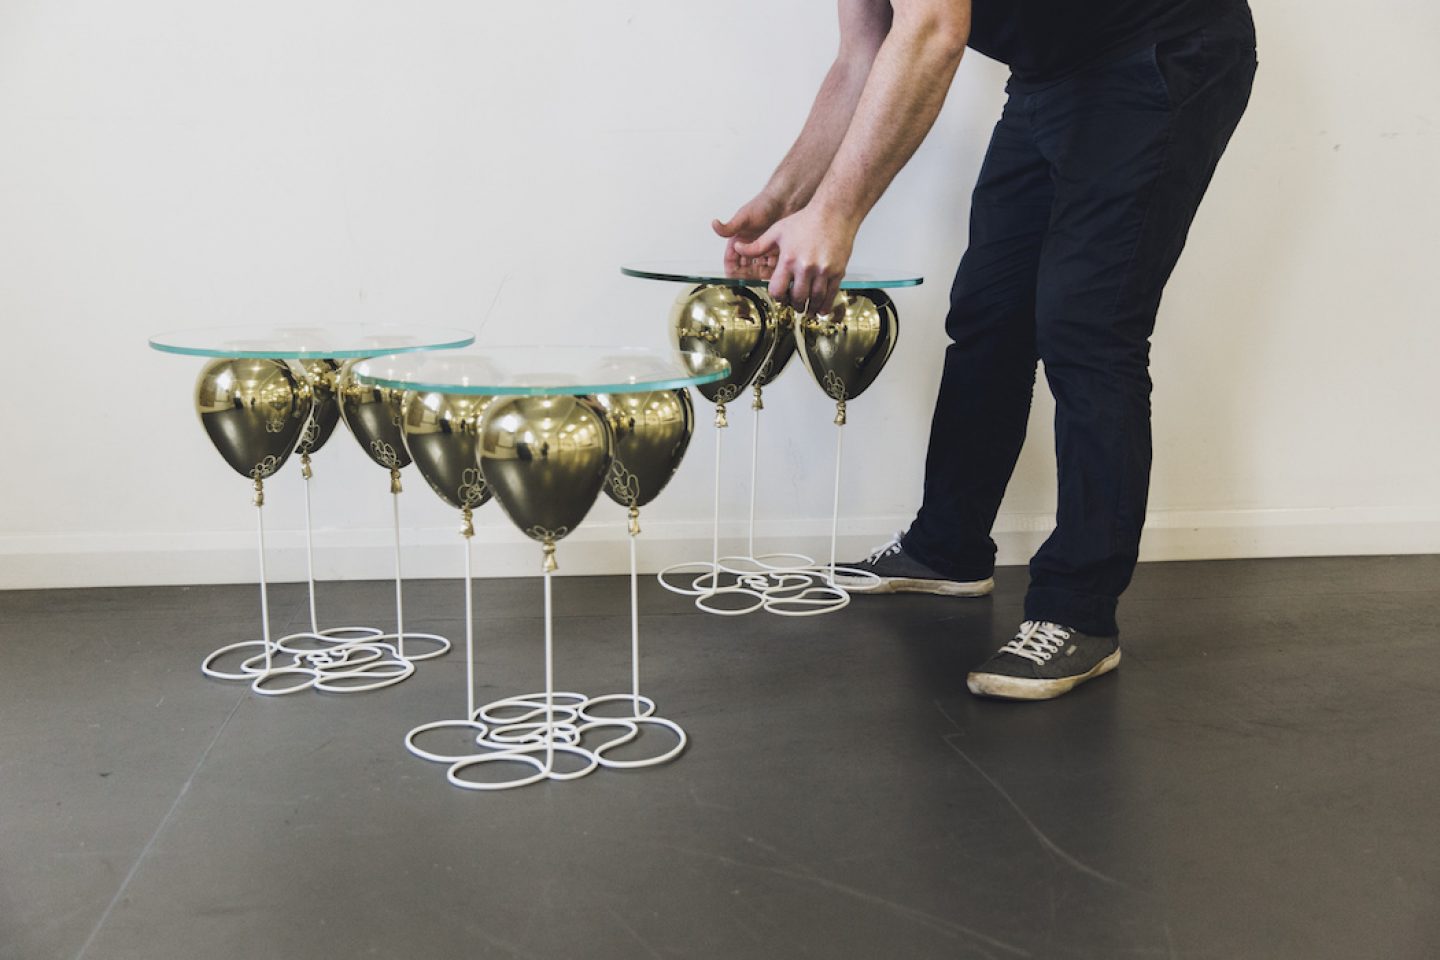 Up Balloon Table - Artsy table using balloons to hold up glass tabletop - Duffy London